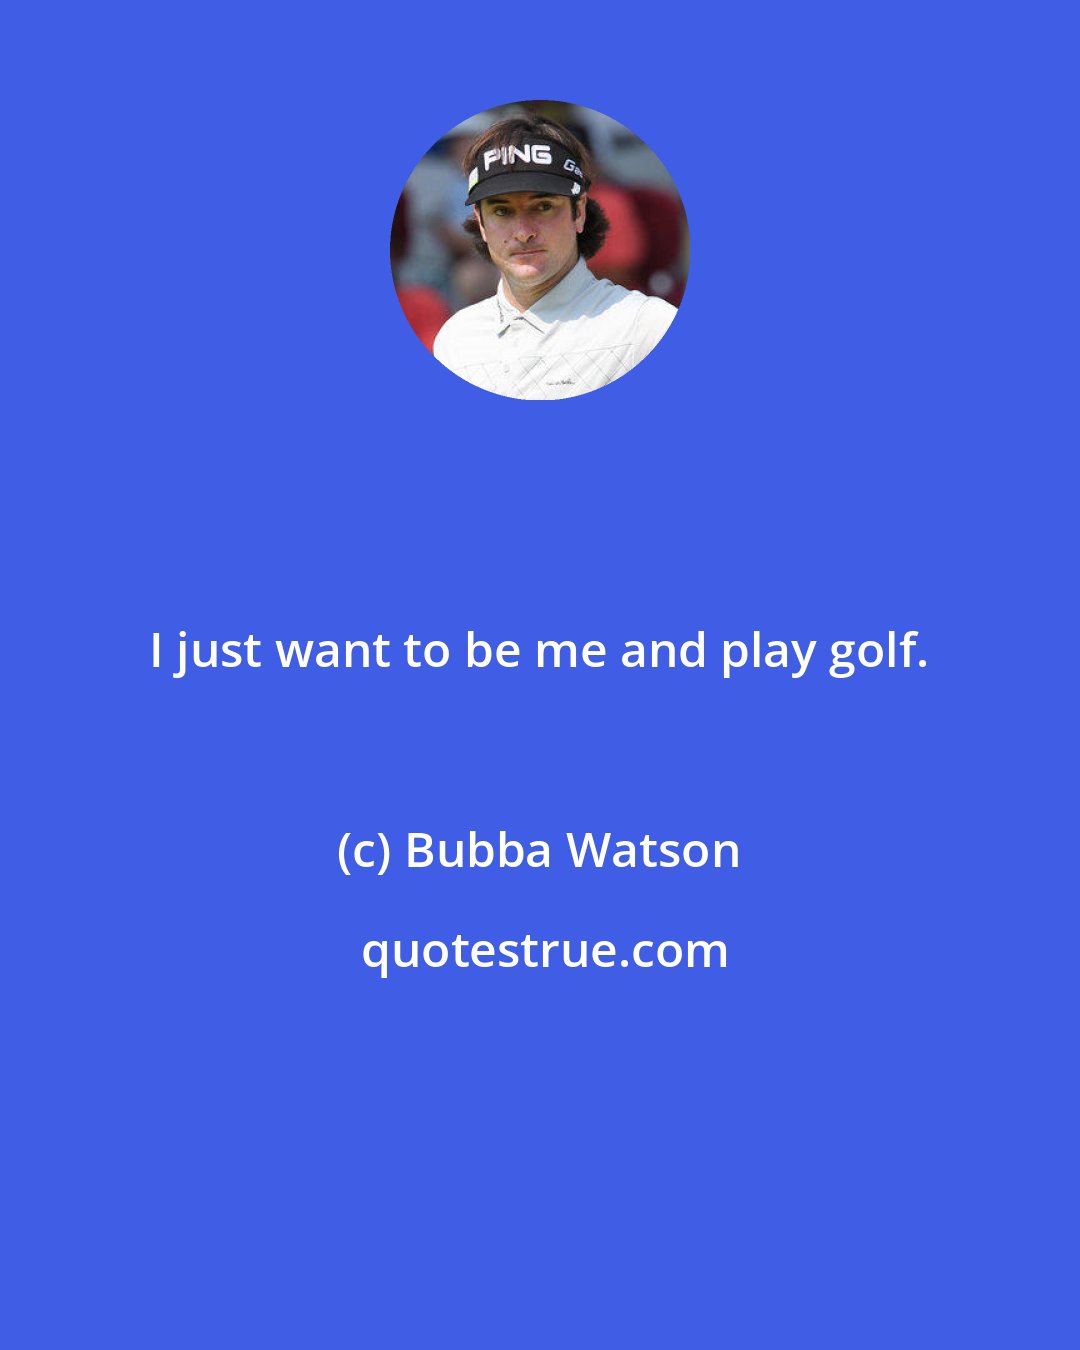 Bubba Watson: I just want to be me and play golf.